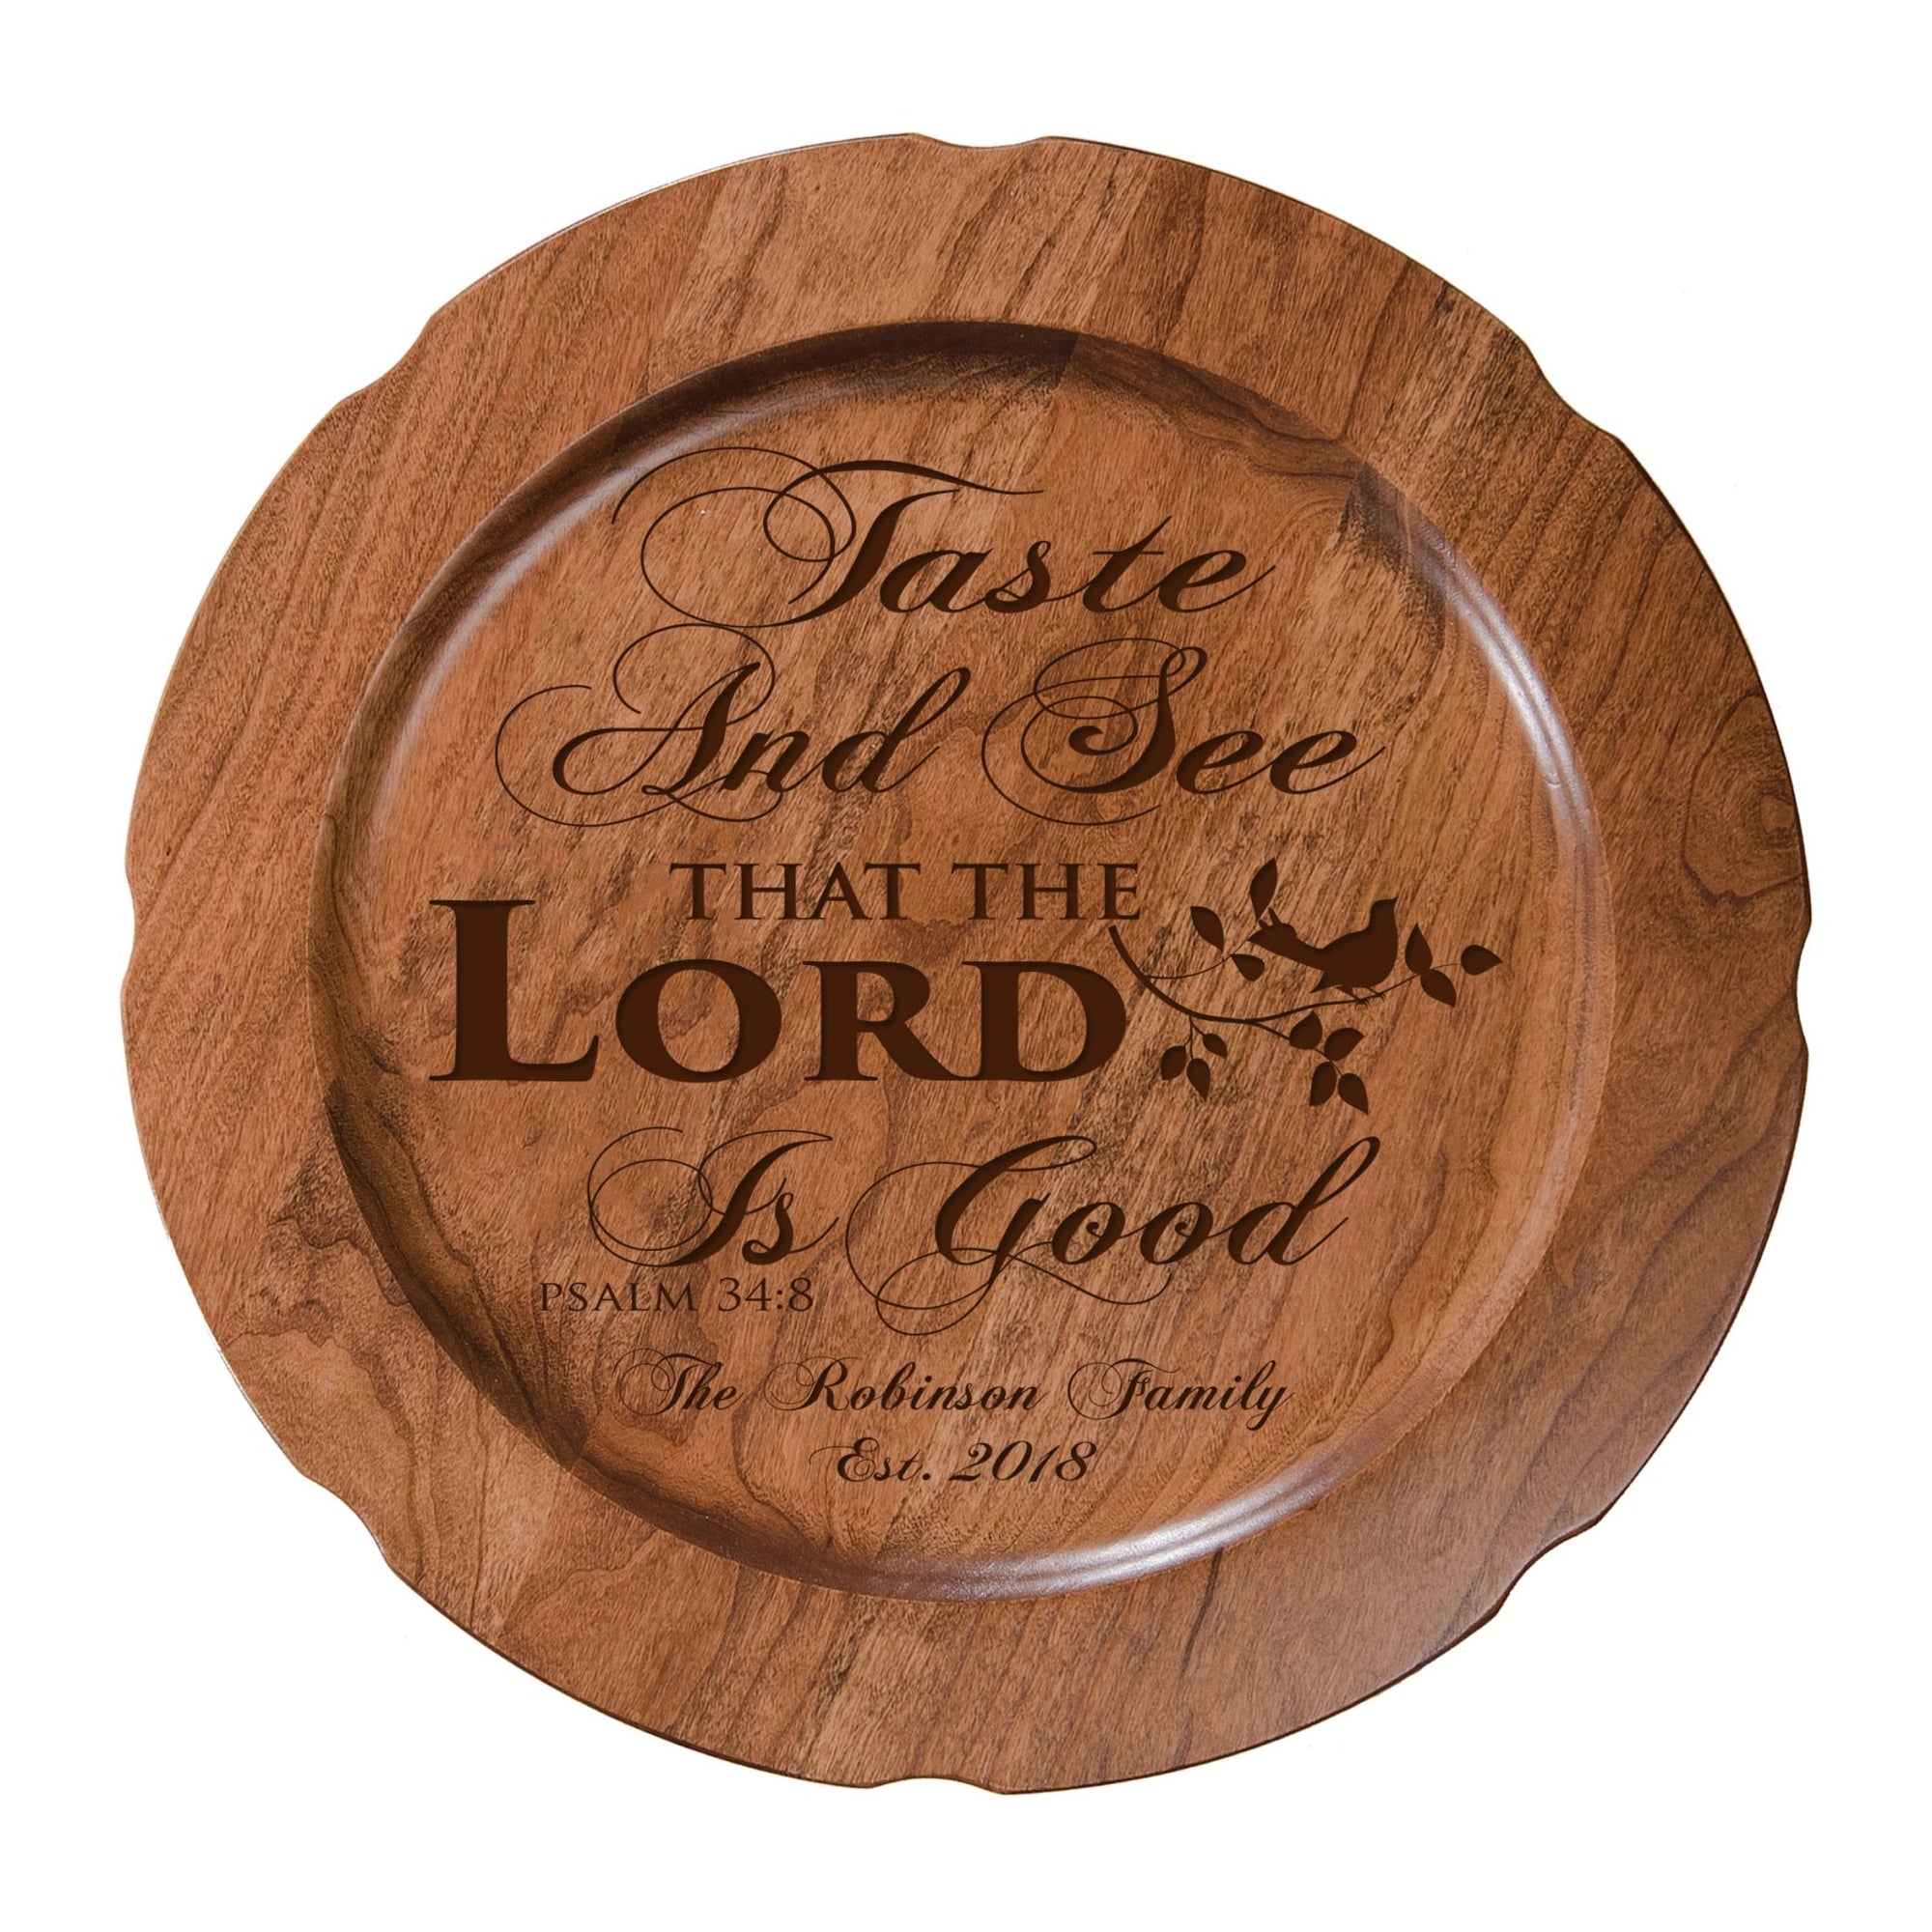 Personalized Inspirational Plates With Quotes - Taste And See - LifeSong Milestones